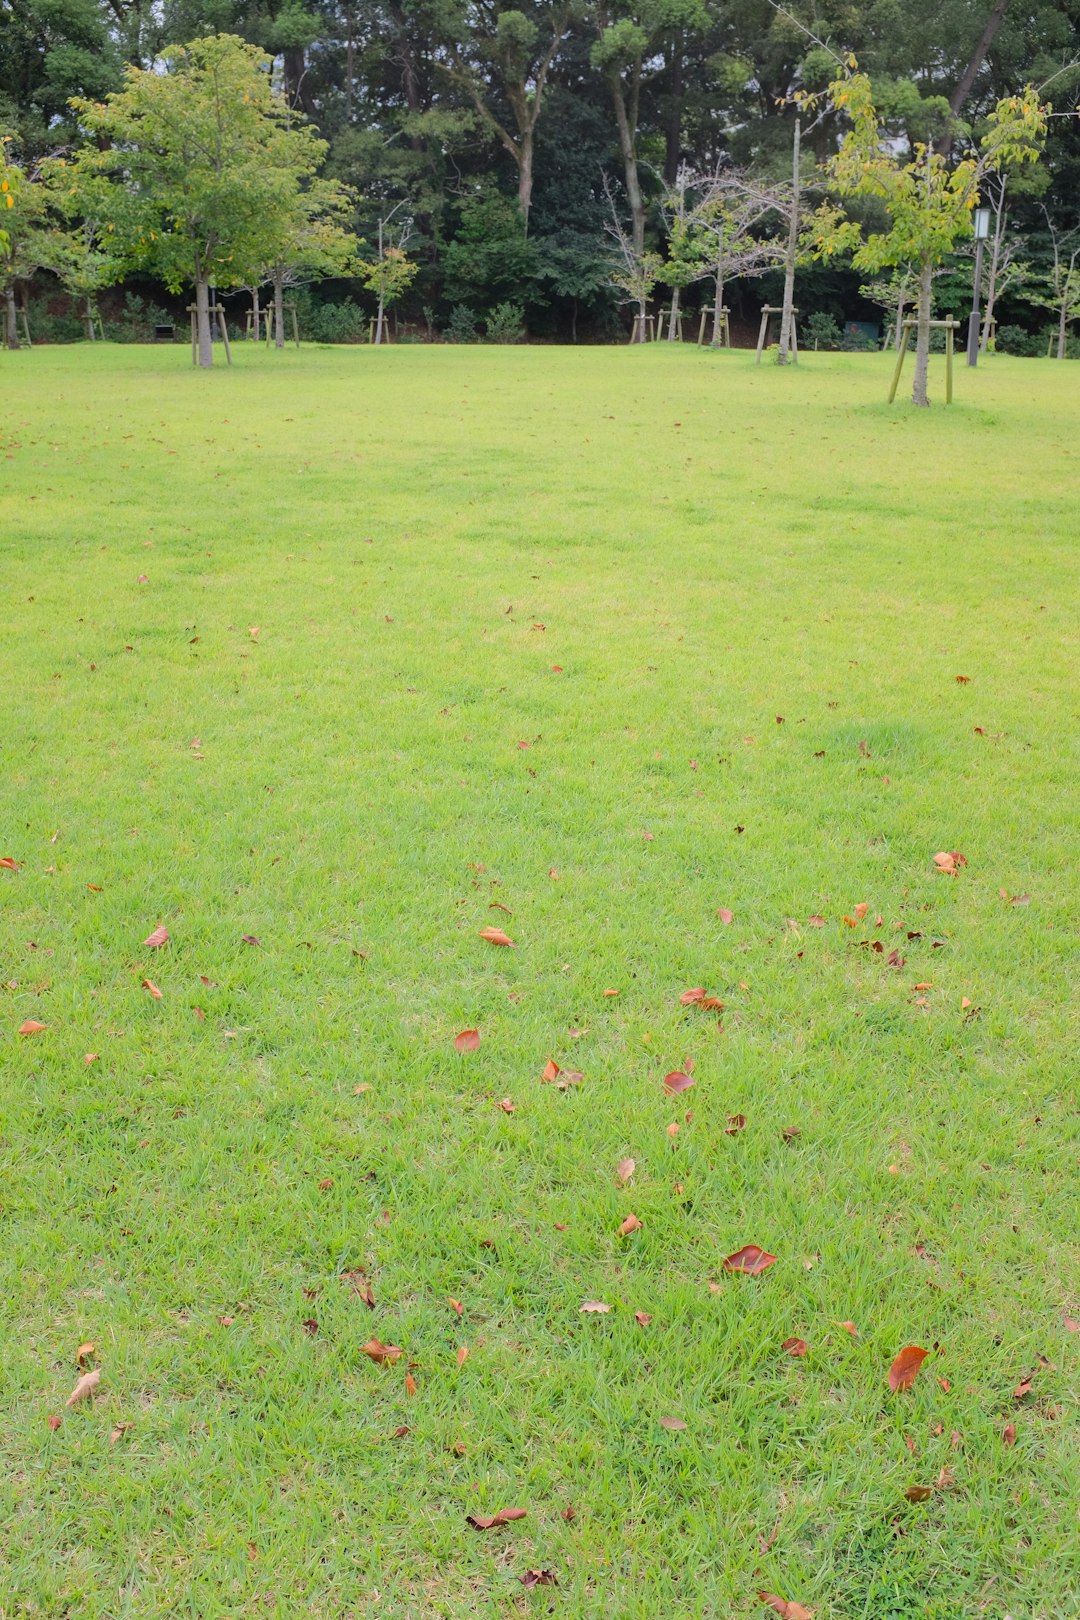 green grass field with trees during daytime